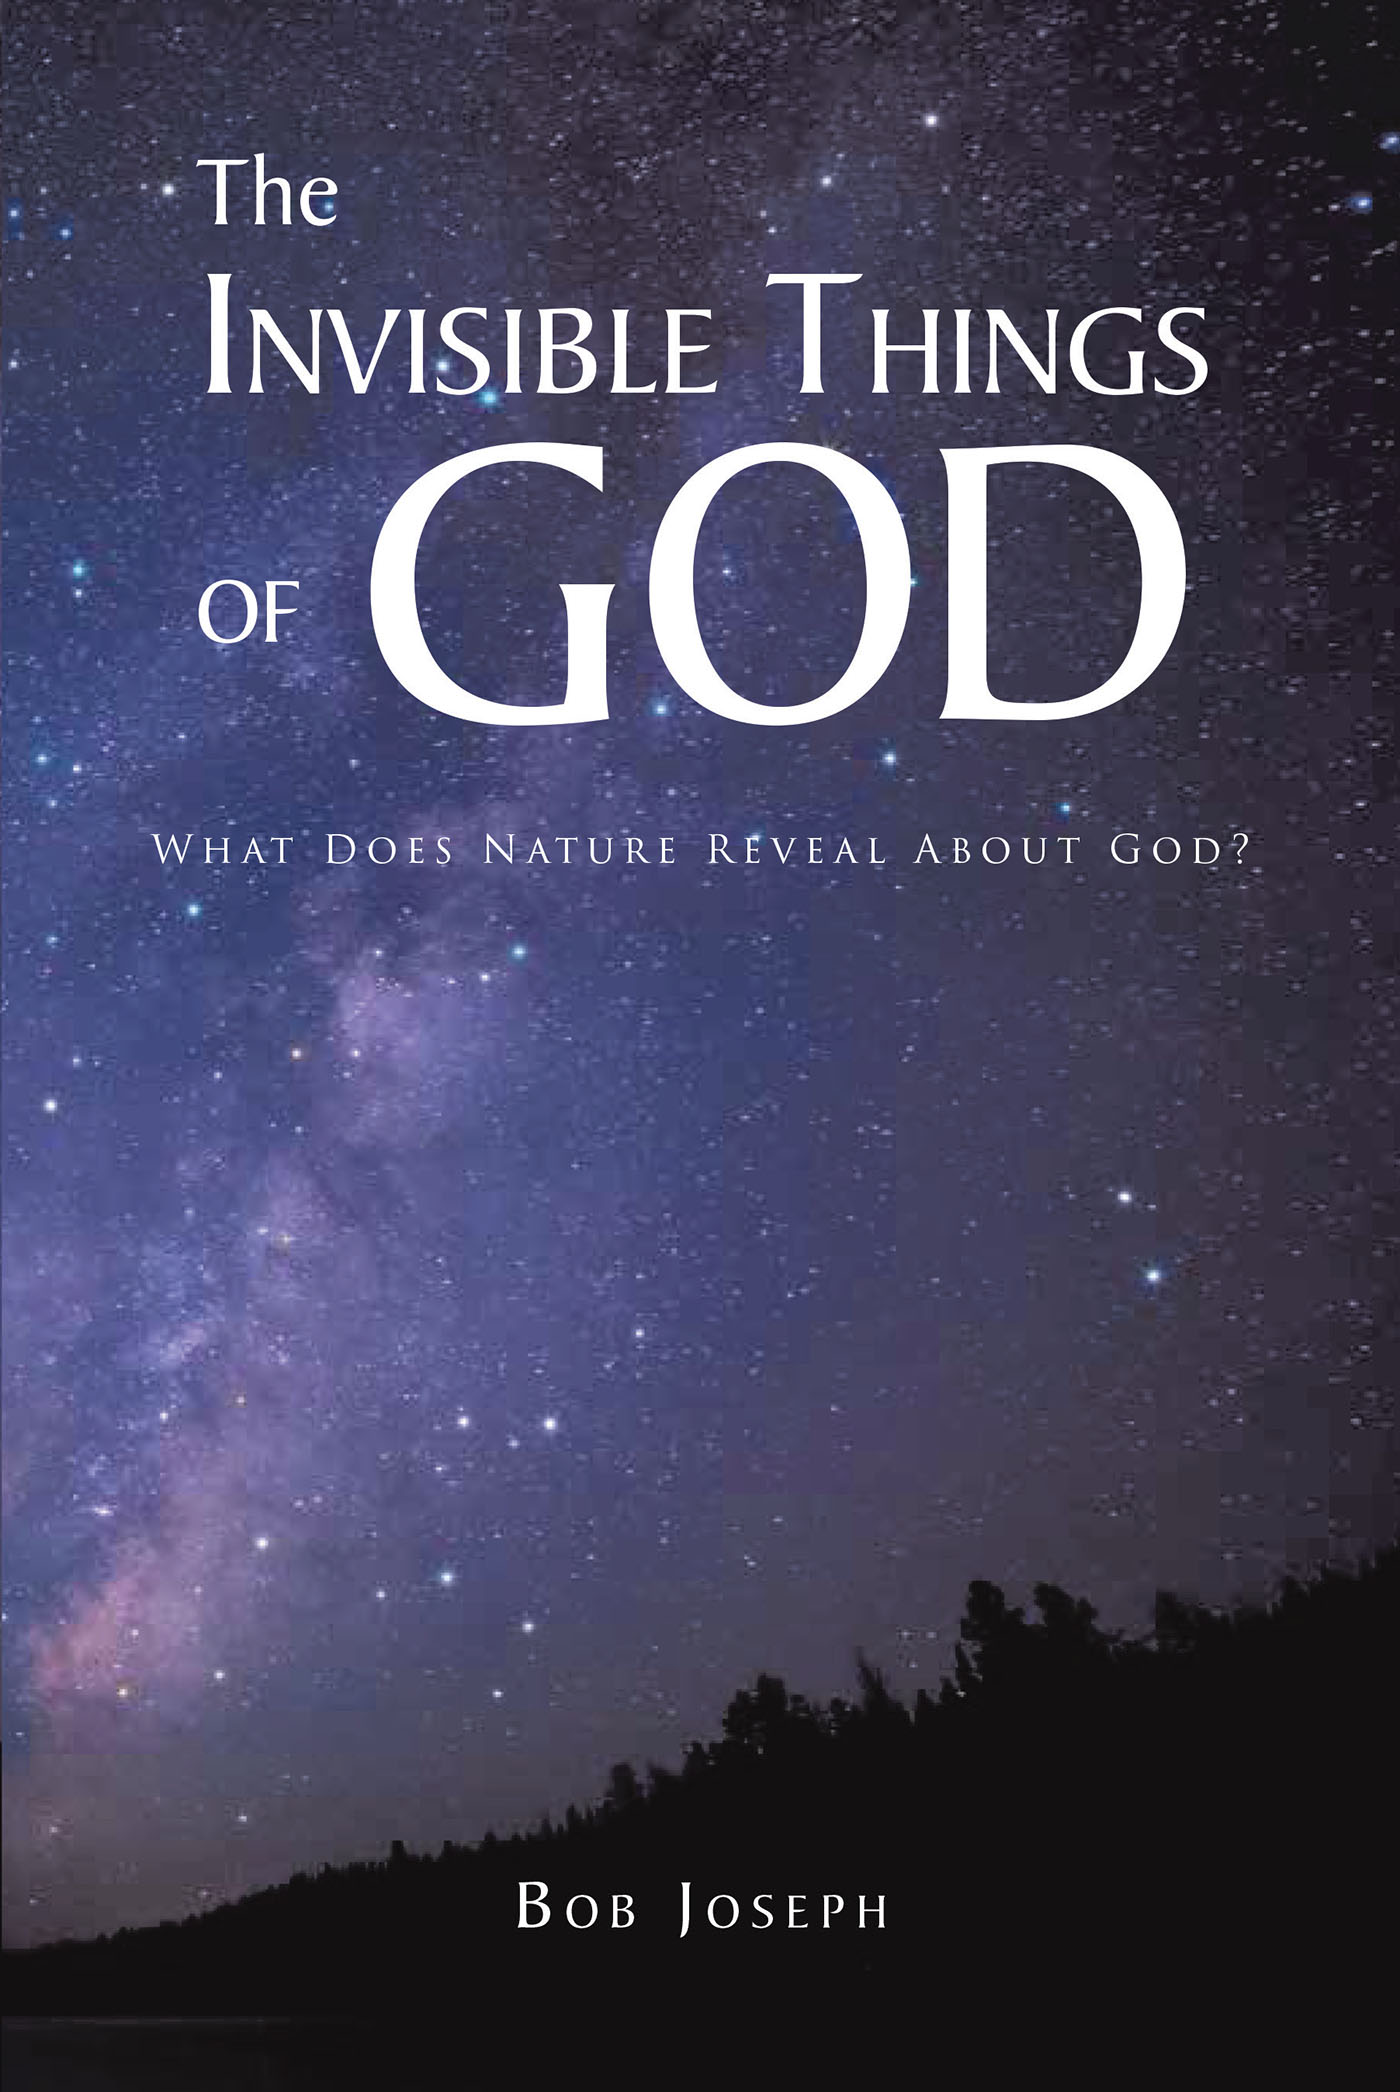 Bob Joseph’s Newly Released "The Invisible Things of God: What Does Nature Reveal About God?" is a Stunning Display of the Wonders of Creation